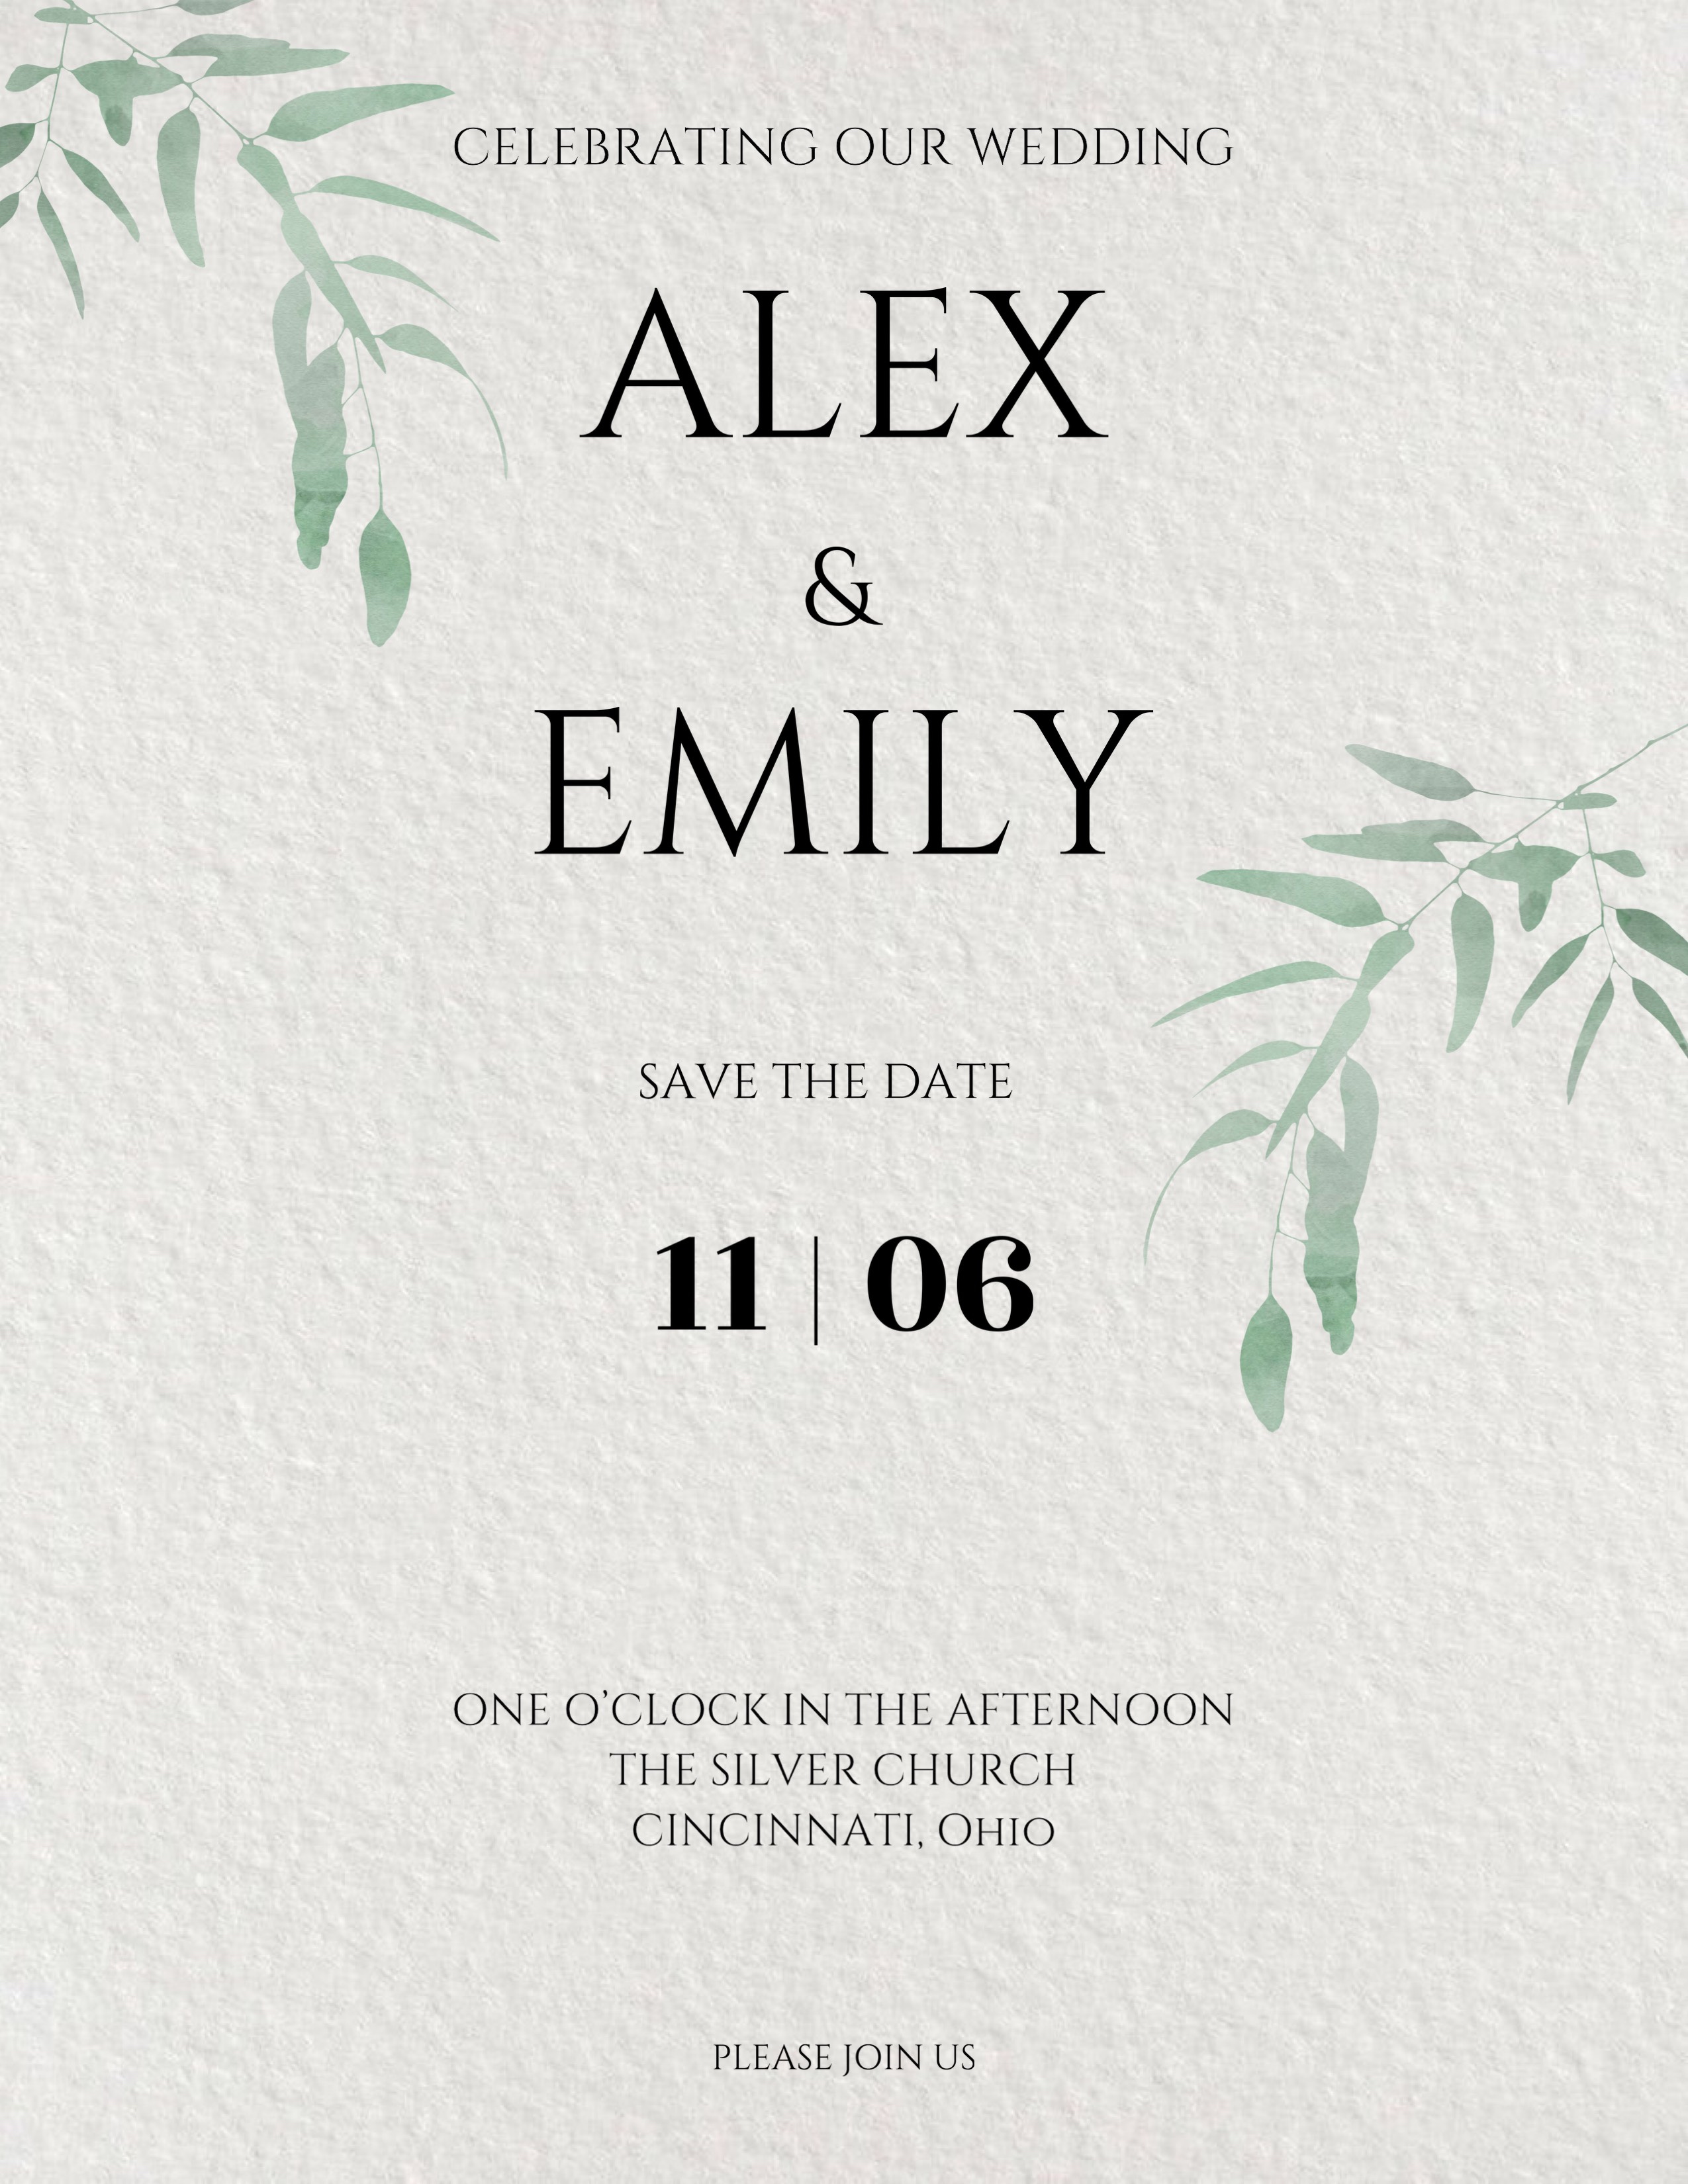 A White And Green Wedding Card With Leaves On It Wedding Template